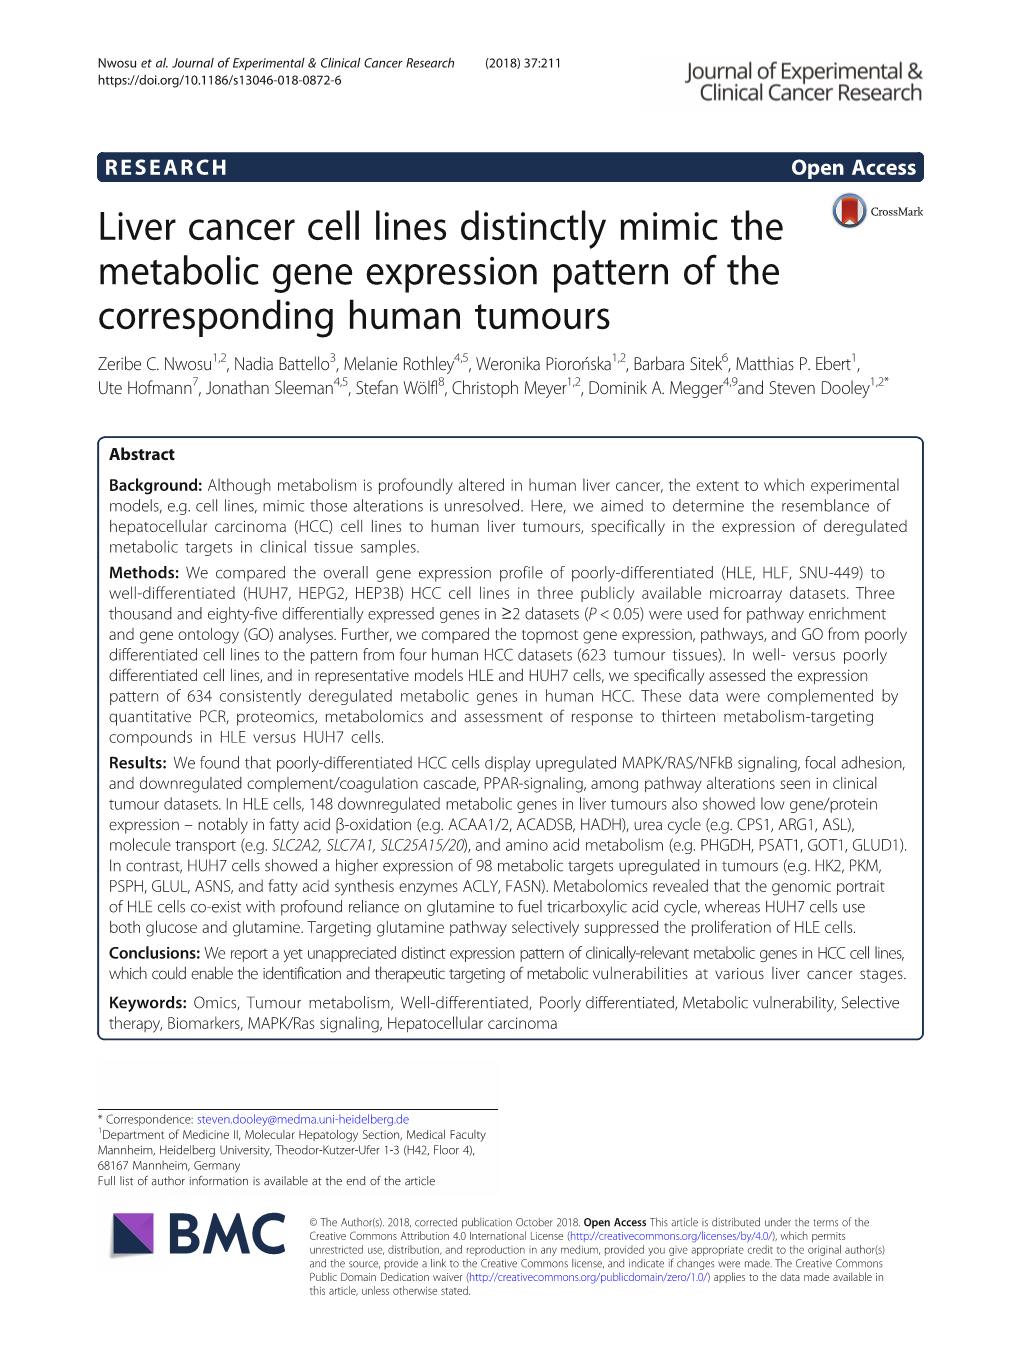 Liver Cancer Cell Lines Distinctly Mimic the Metabolic Gene Expression Pattern of the Corresponding Human Tumours Zeribe C